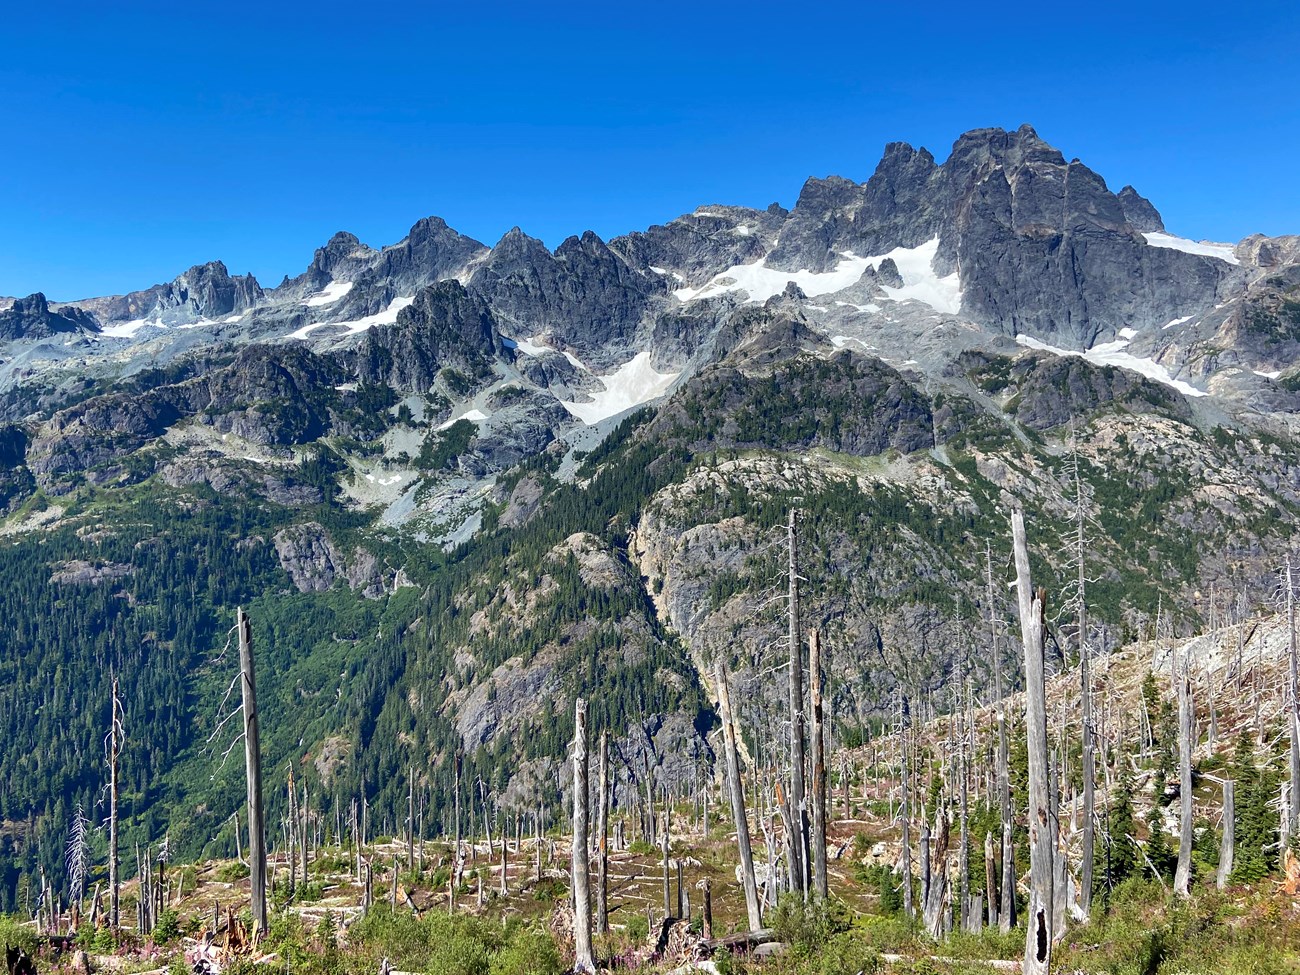 Small, white glaciers nestled among rocky peaks, viewed from a burned forest with new growth among graying, decaying tree trunks.